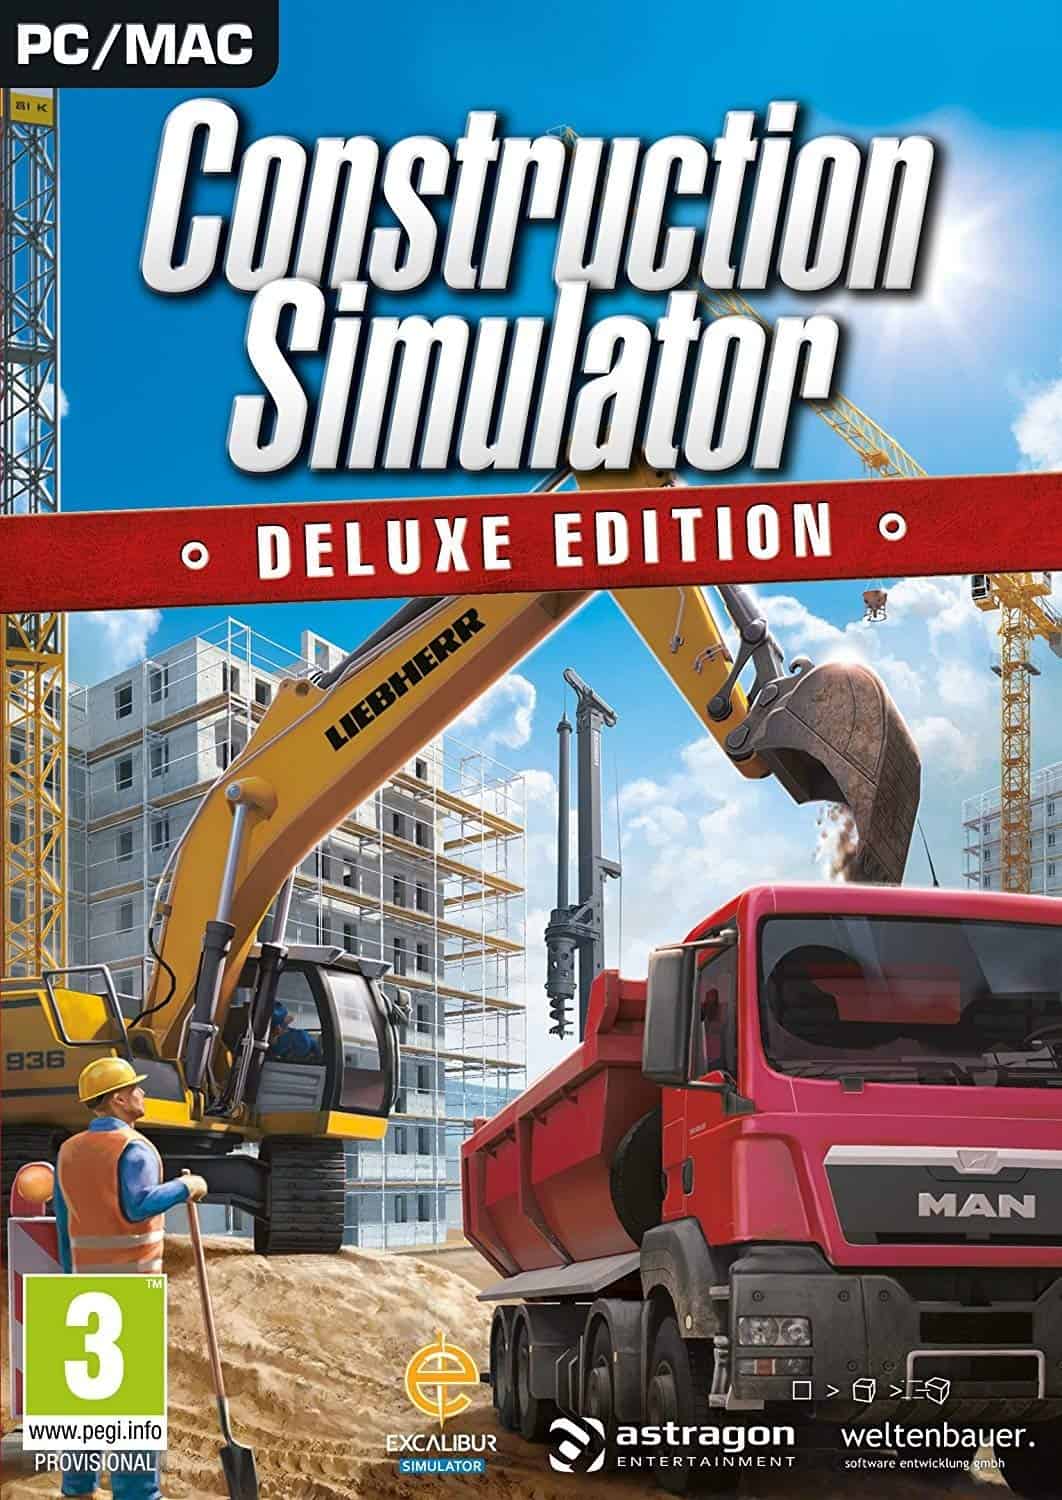 Construction simulator 2 pc game free download